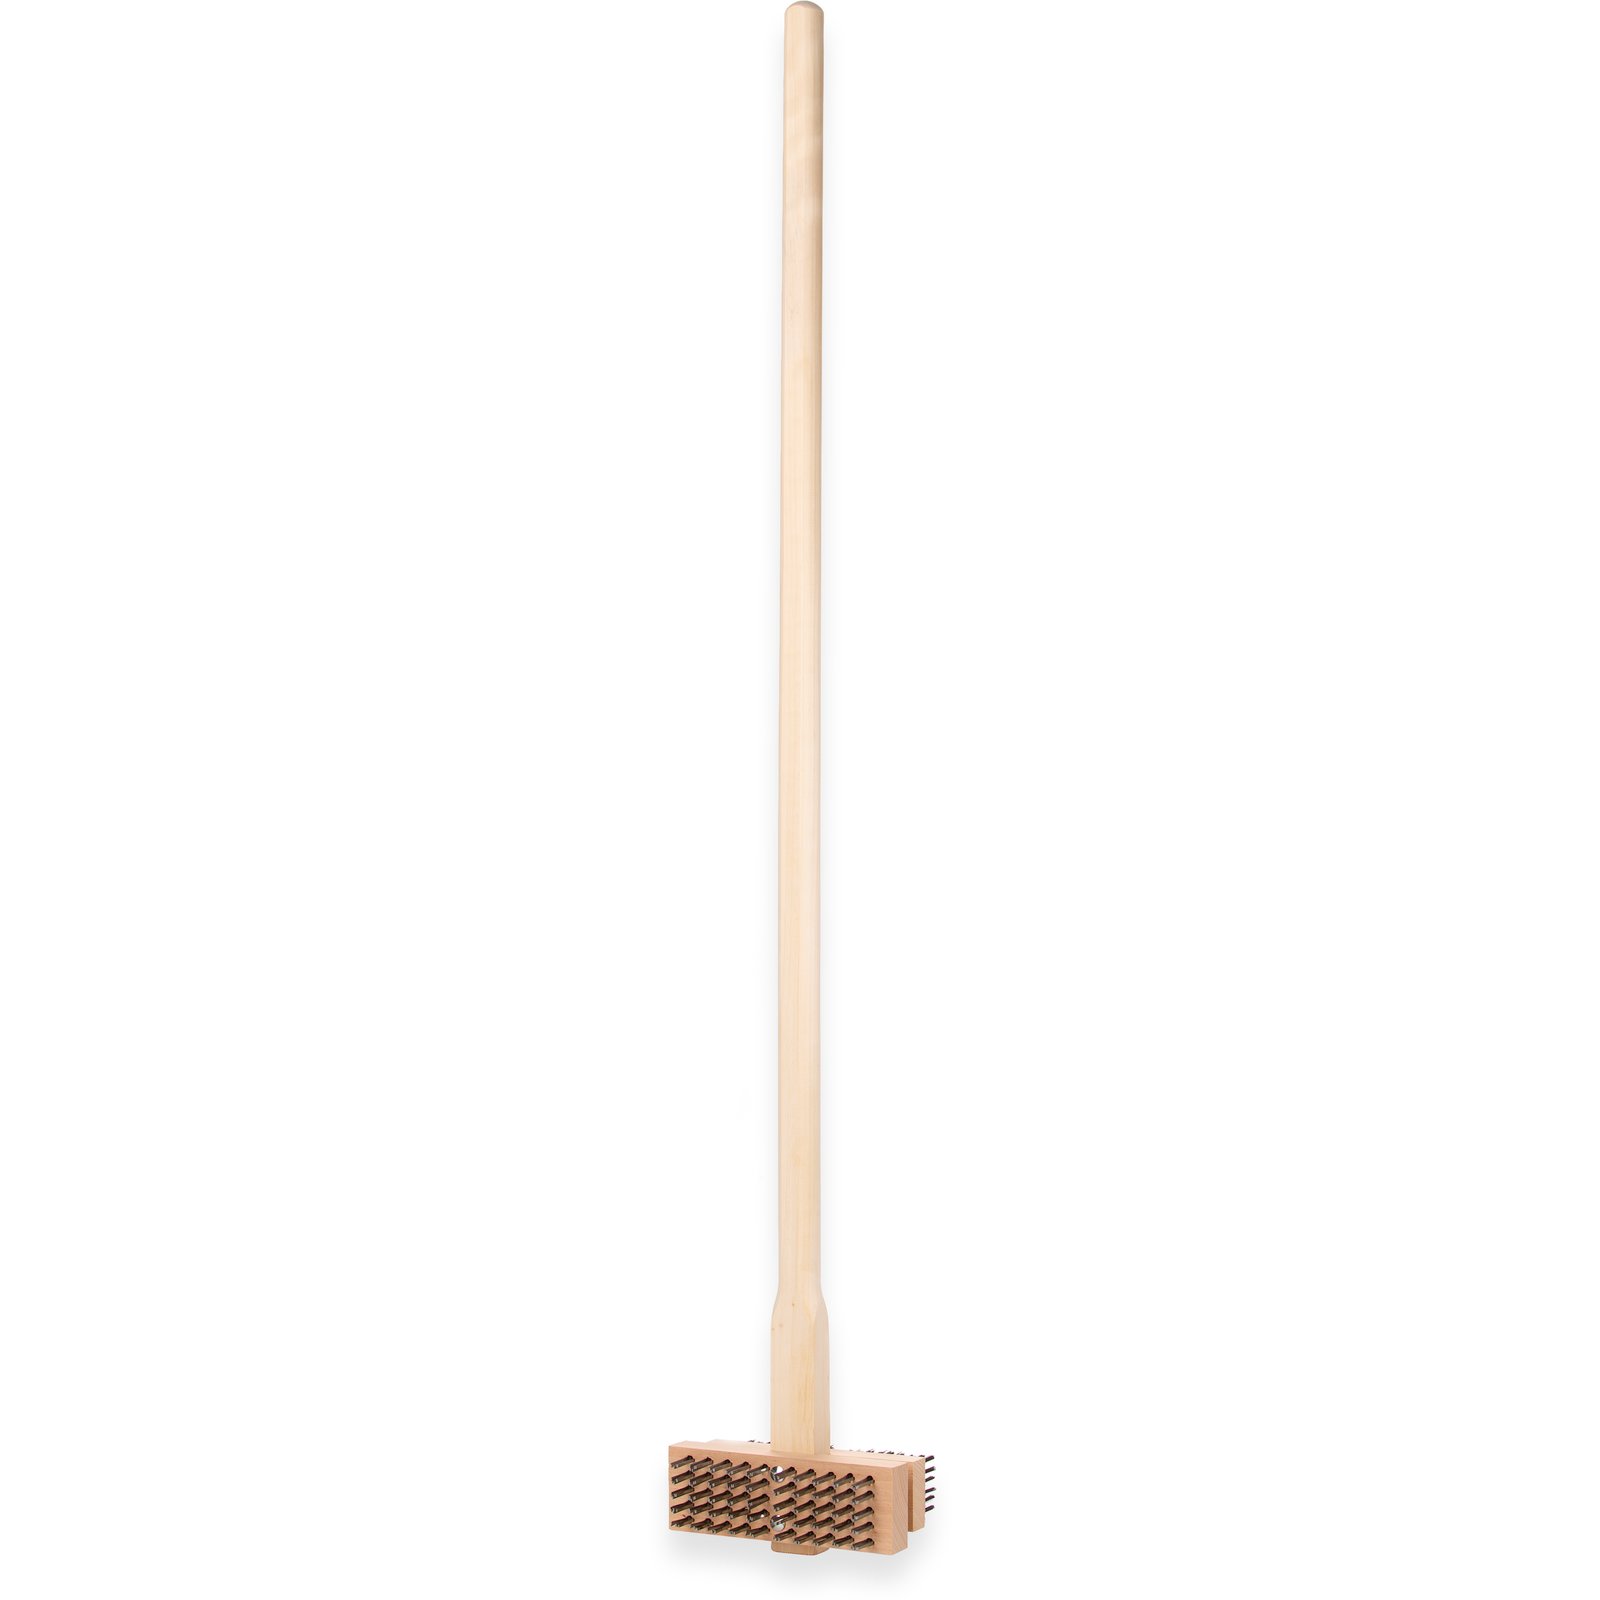 48 Overall Length Carlisle 4029400 Carbon Steel Double Broiler King Brush with Hardwood Handle Case of 2 7-3/4 Brush Length 1-5/8 Bristle Trim 